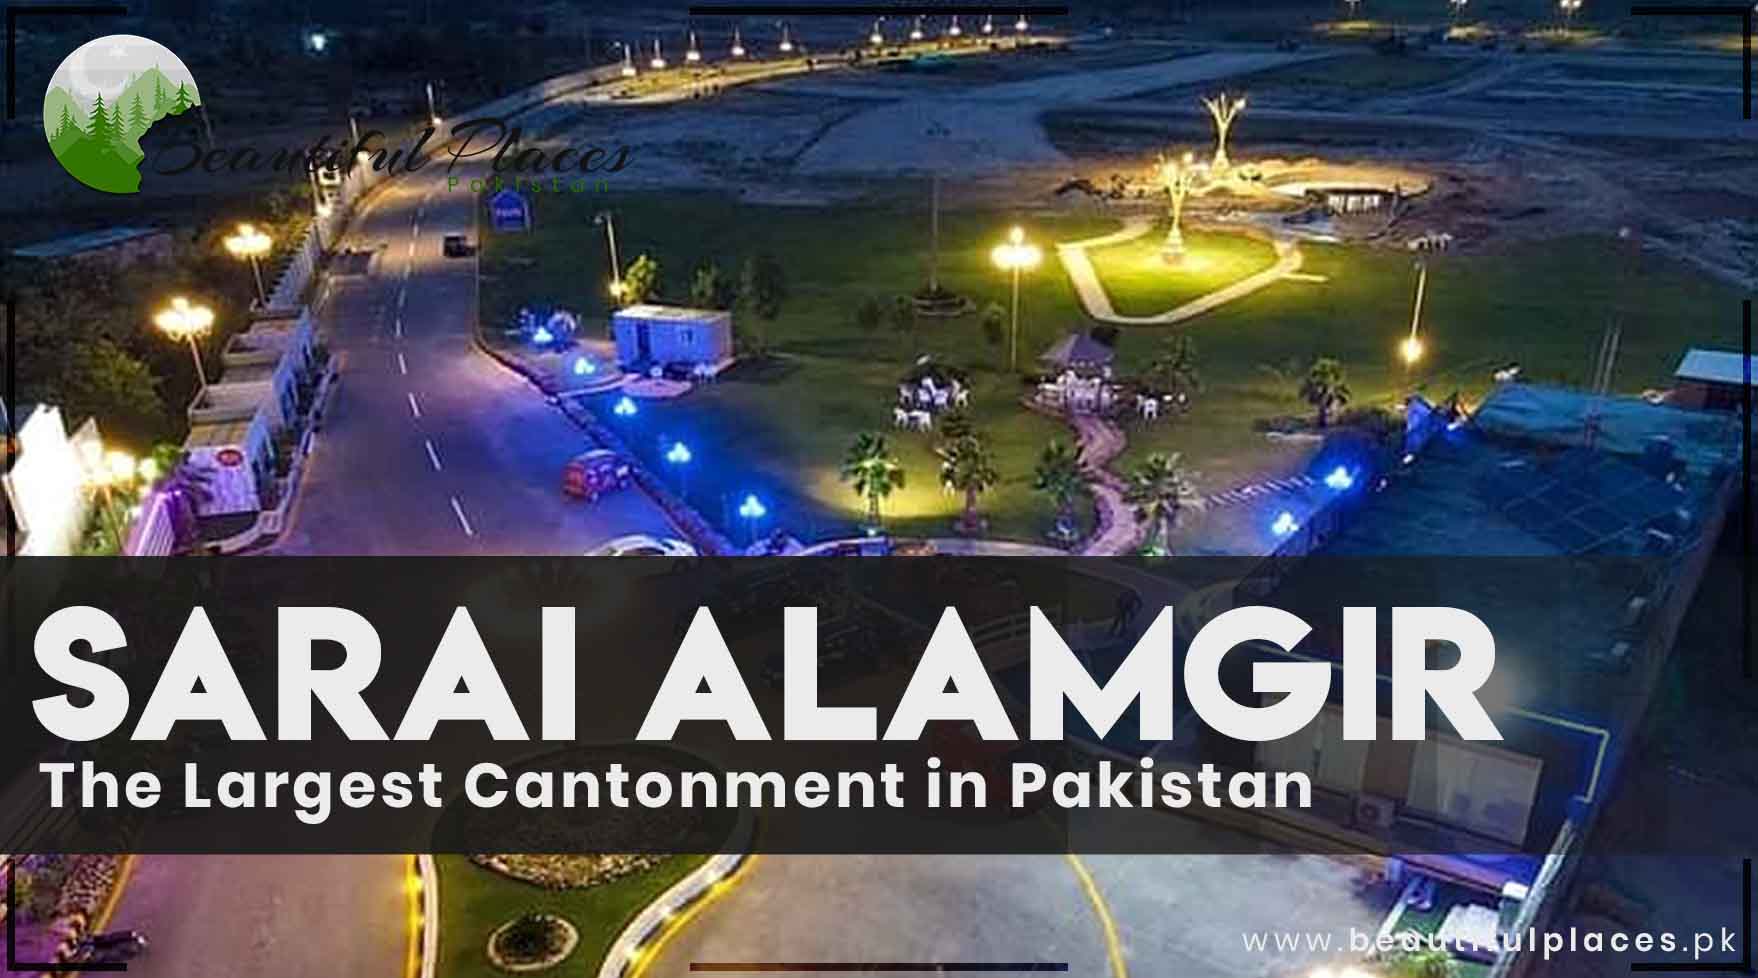 About Sarai Alamgir | The Largest Cantonment in Pakistan